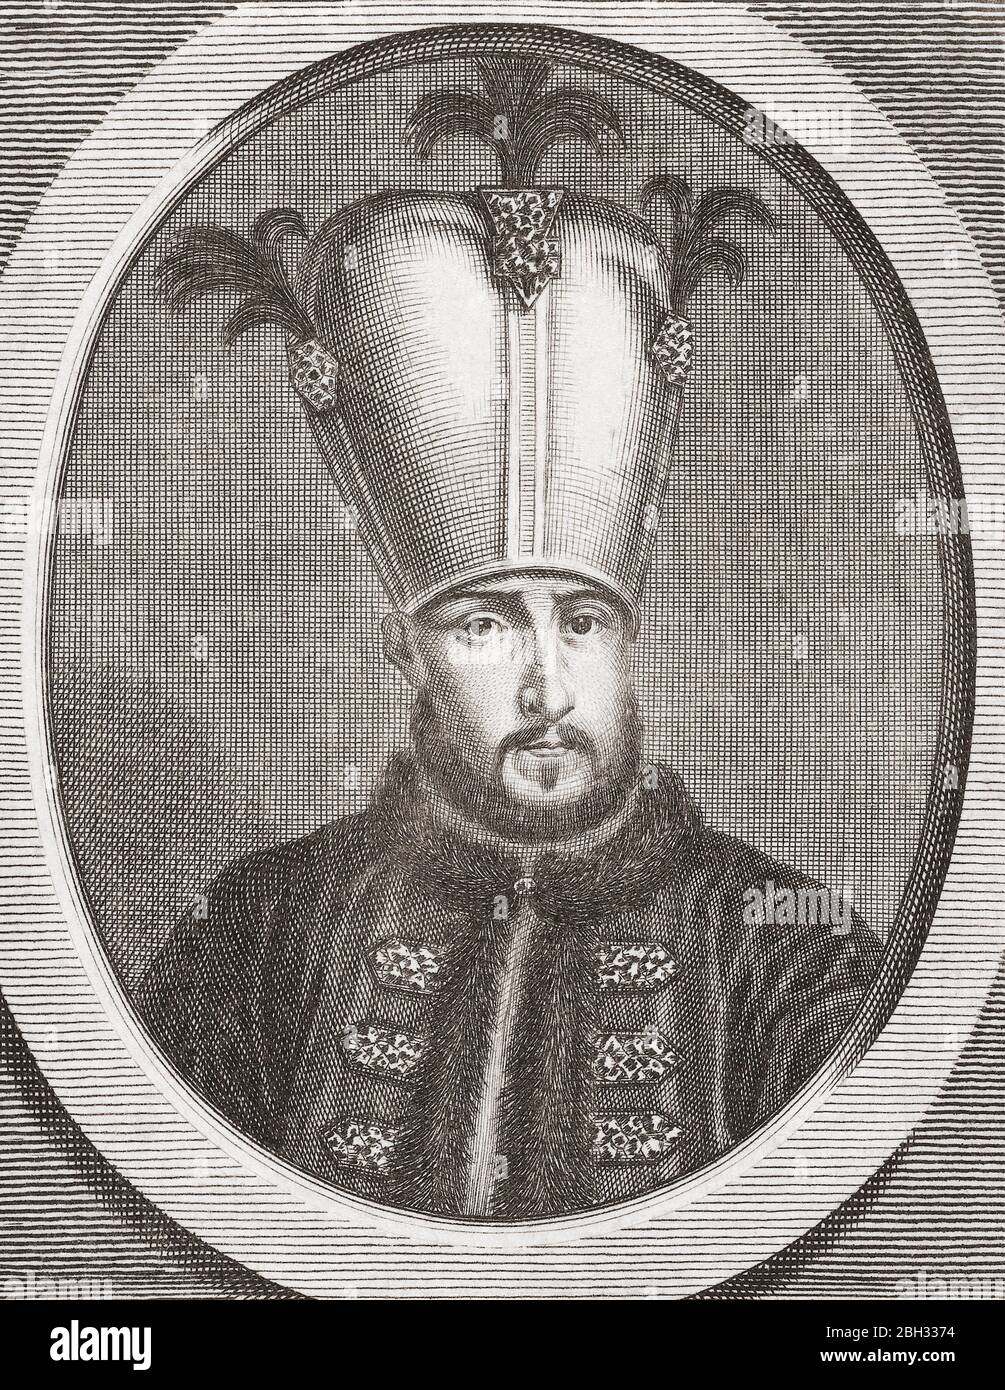 Ahmed III, 1673 – 1736.  Sultan of the Ottoman Empire.  After an 18th century engraving by Michiel van der Gucht. Stock Photo